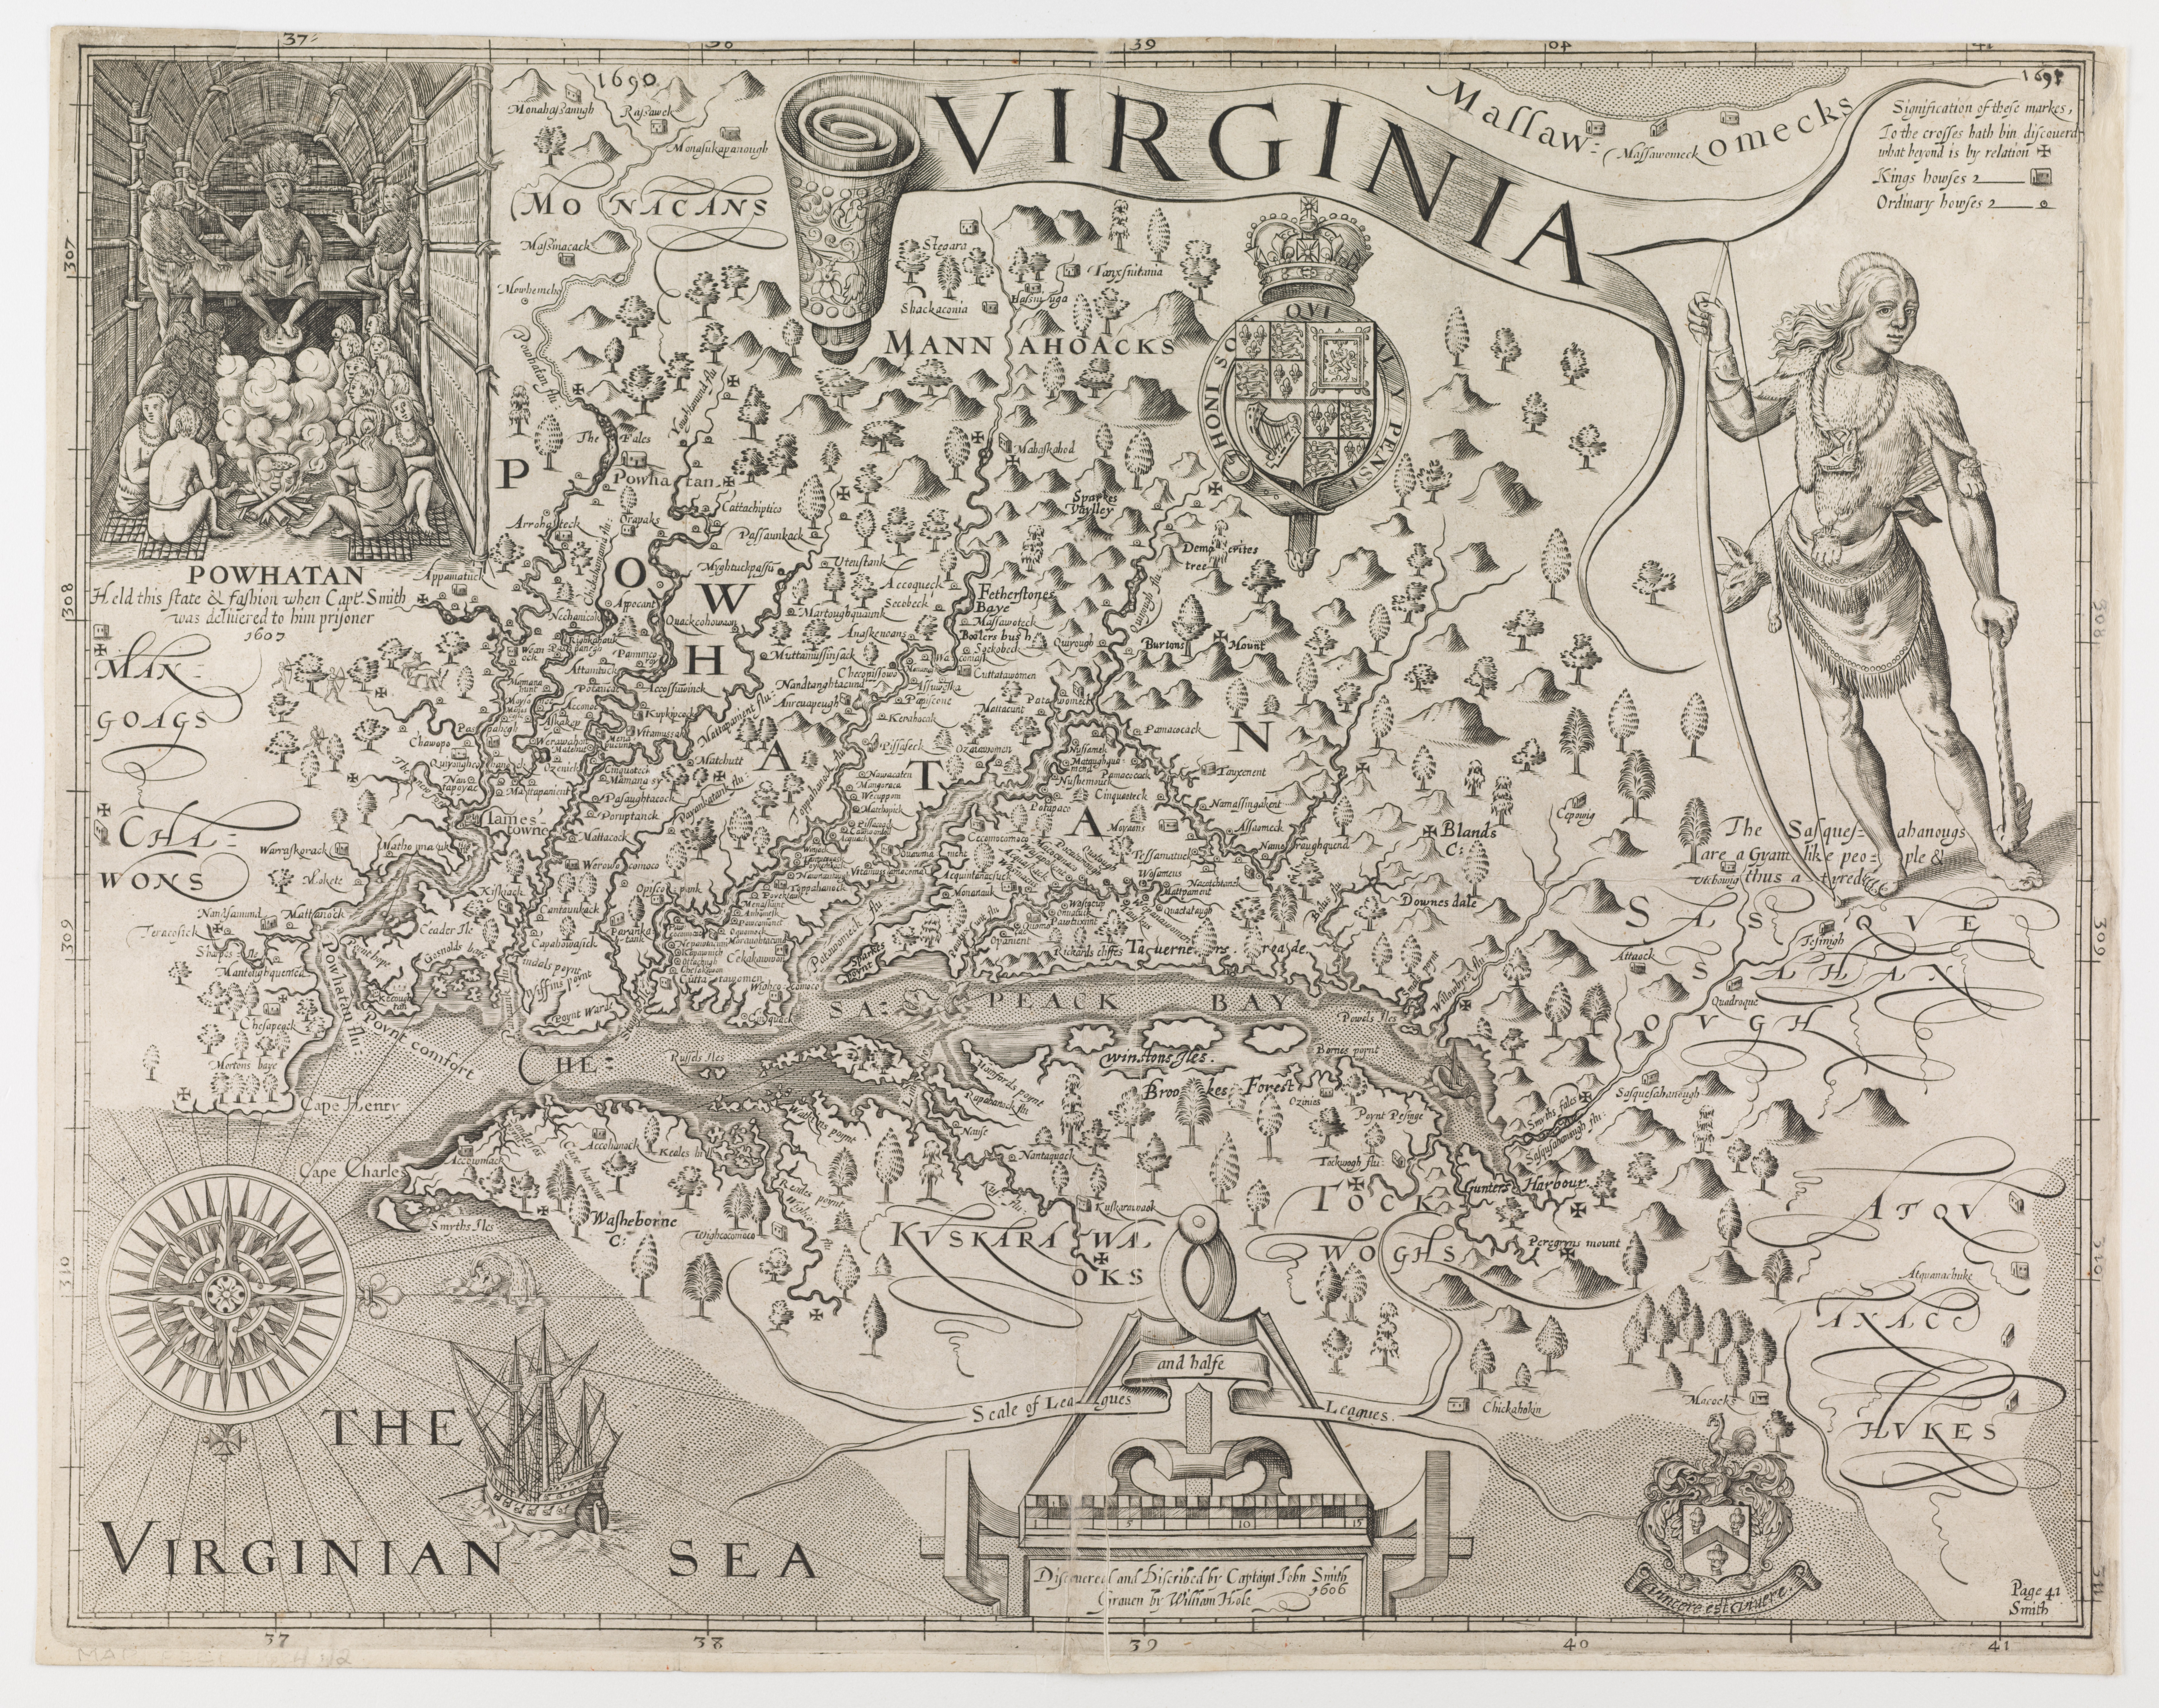 Black & white map of Virginia circa 1690 with a drawing of a Powhatan Indian 